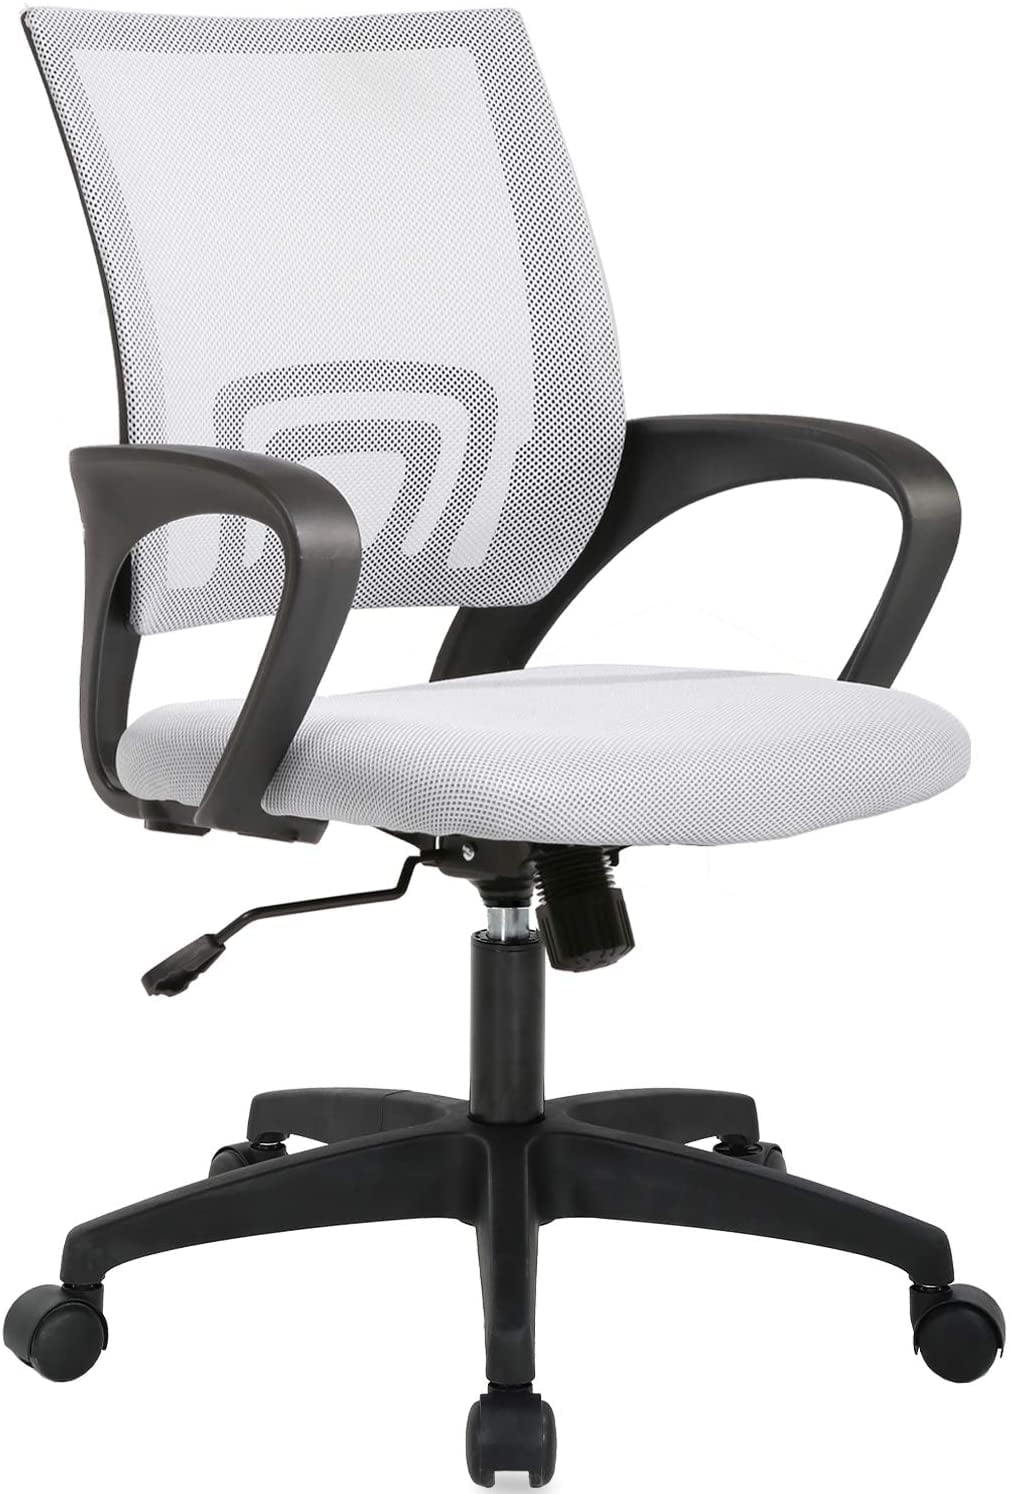 Coohole Home Office Chair Desk Adjustable Swivel Rolling Ergonomic Computer Chair Executive Lumbar Support Mesh Chair-Ship from USA 